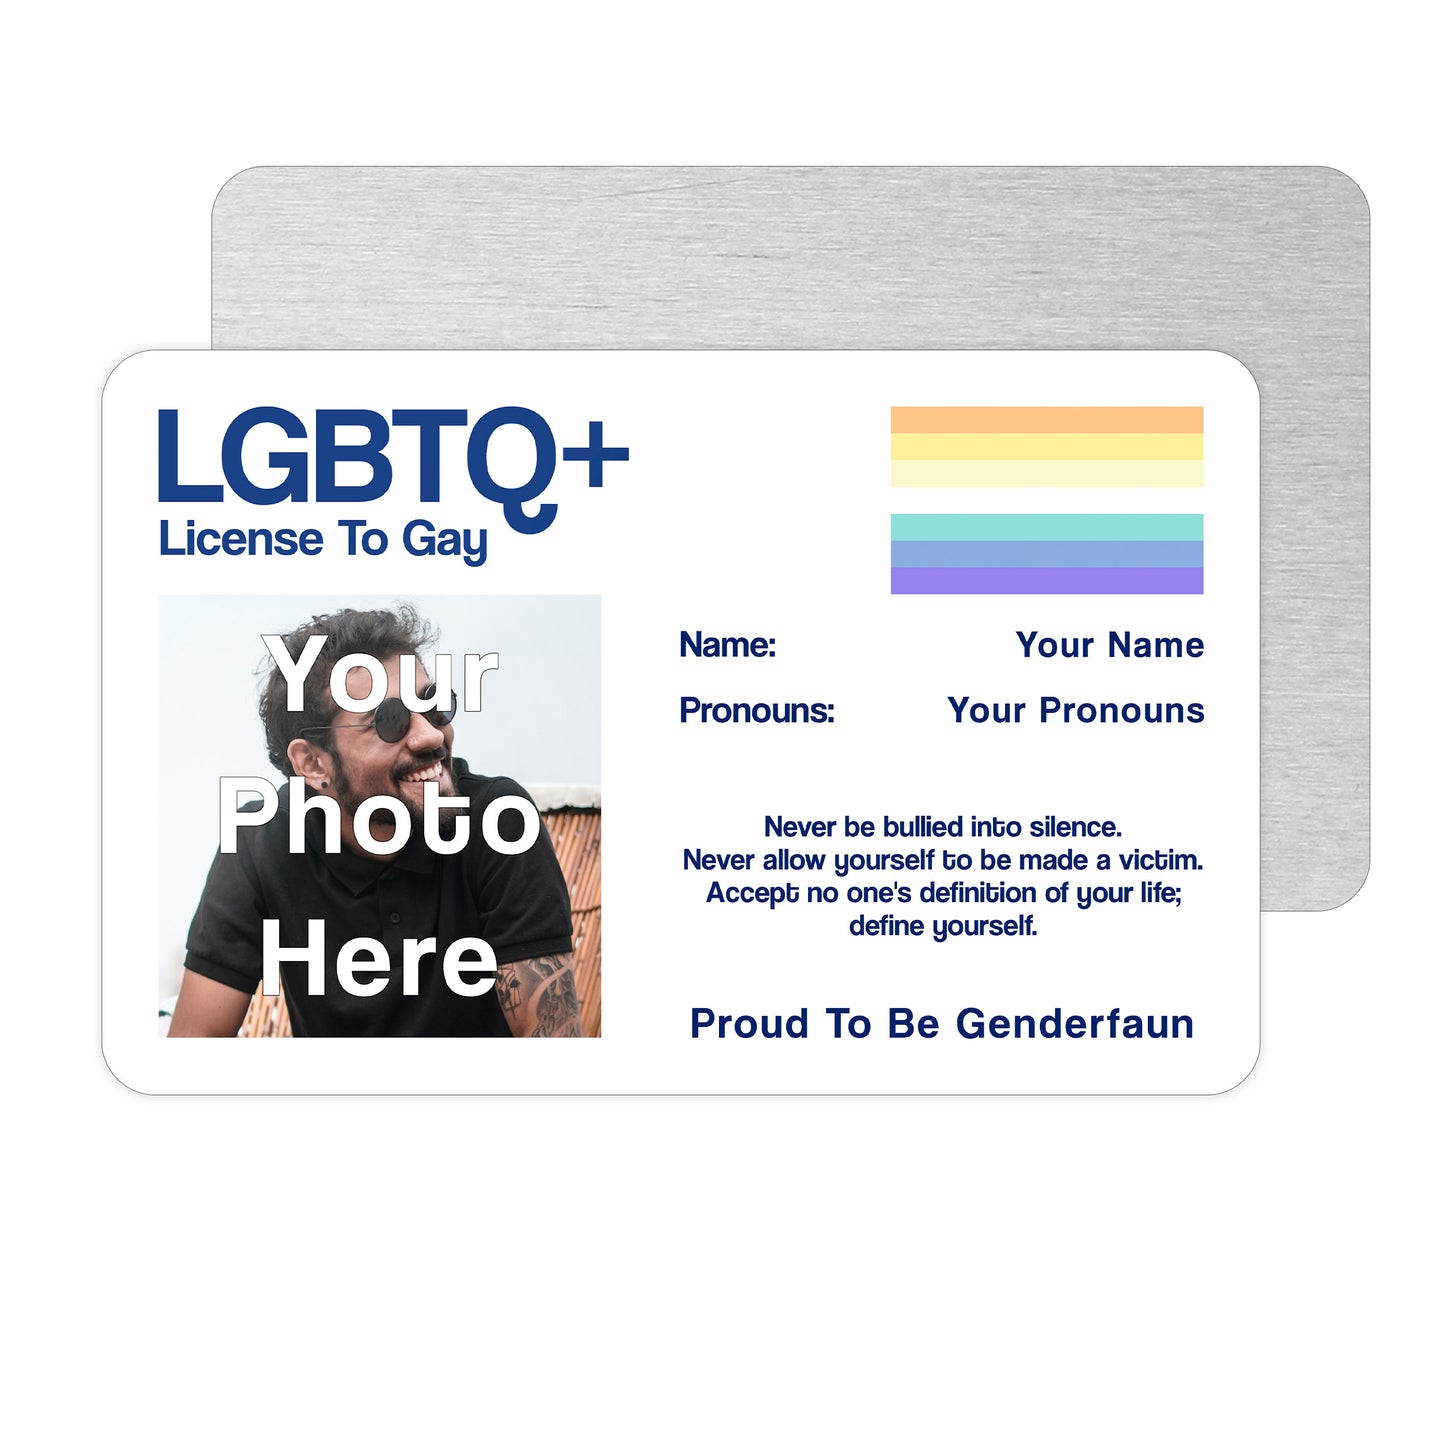 Genderfaun license to gay aluminium wallet card personalised with your name, pronouns and photo